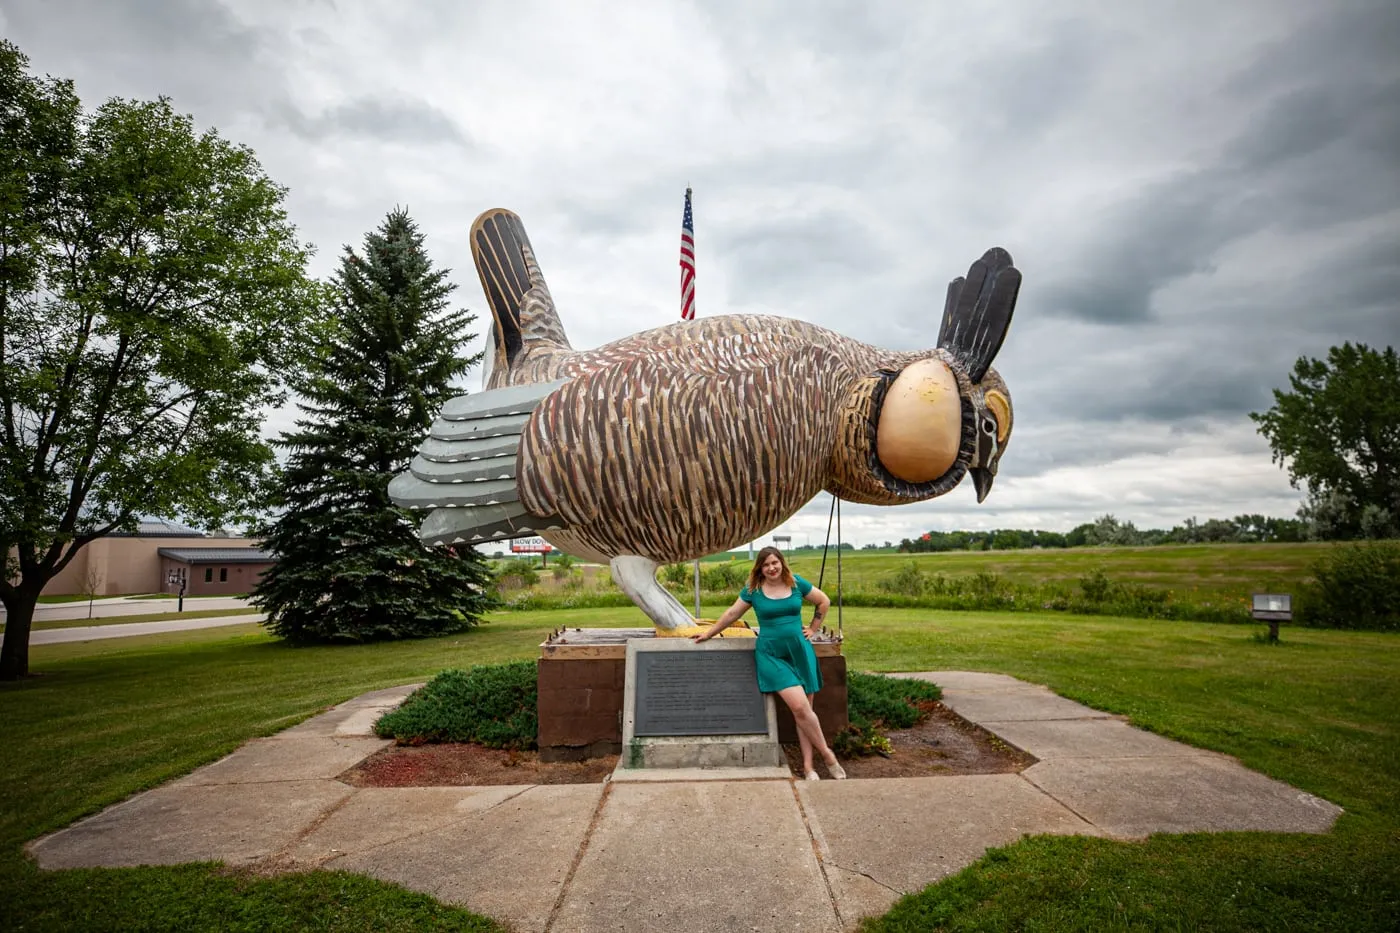 World's Largest "Booming" Prairie Chicken in Rothsay, Minnesota | Minnesota Roadside Attractions